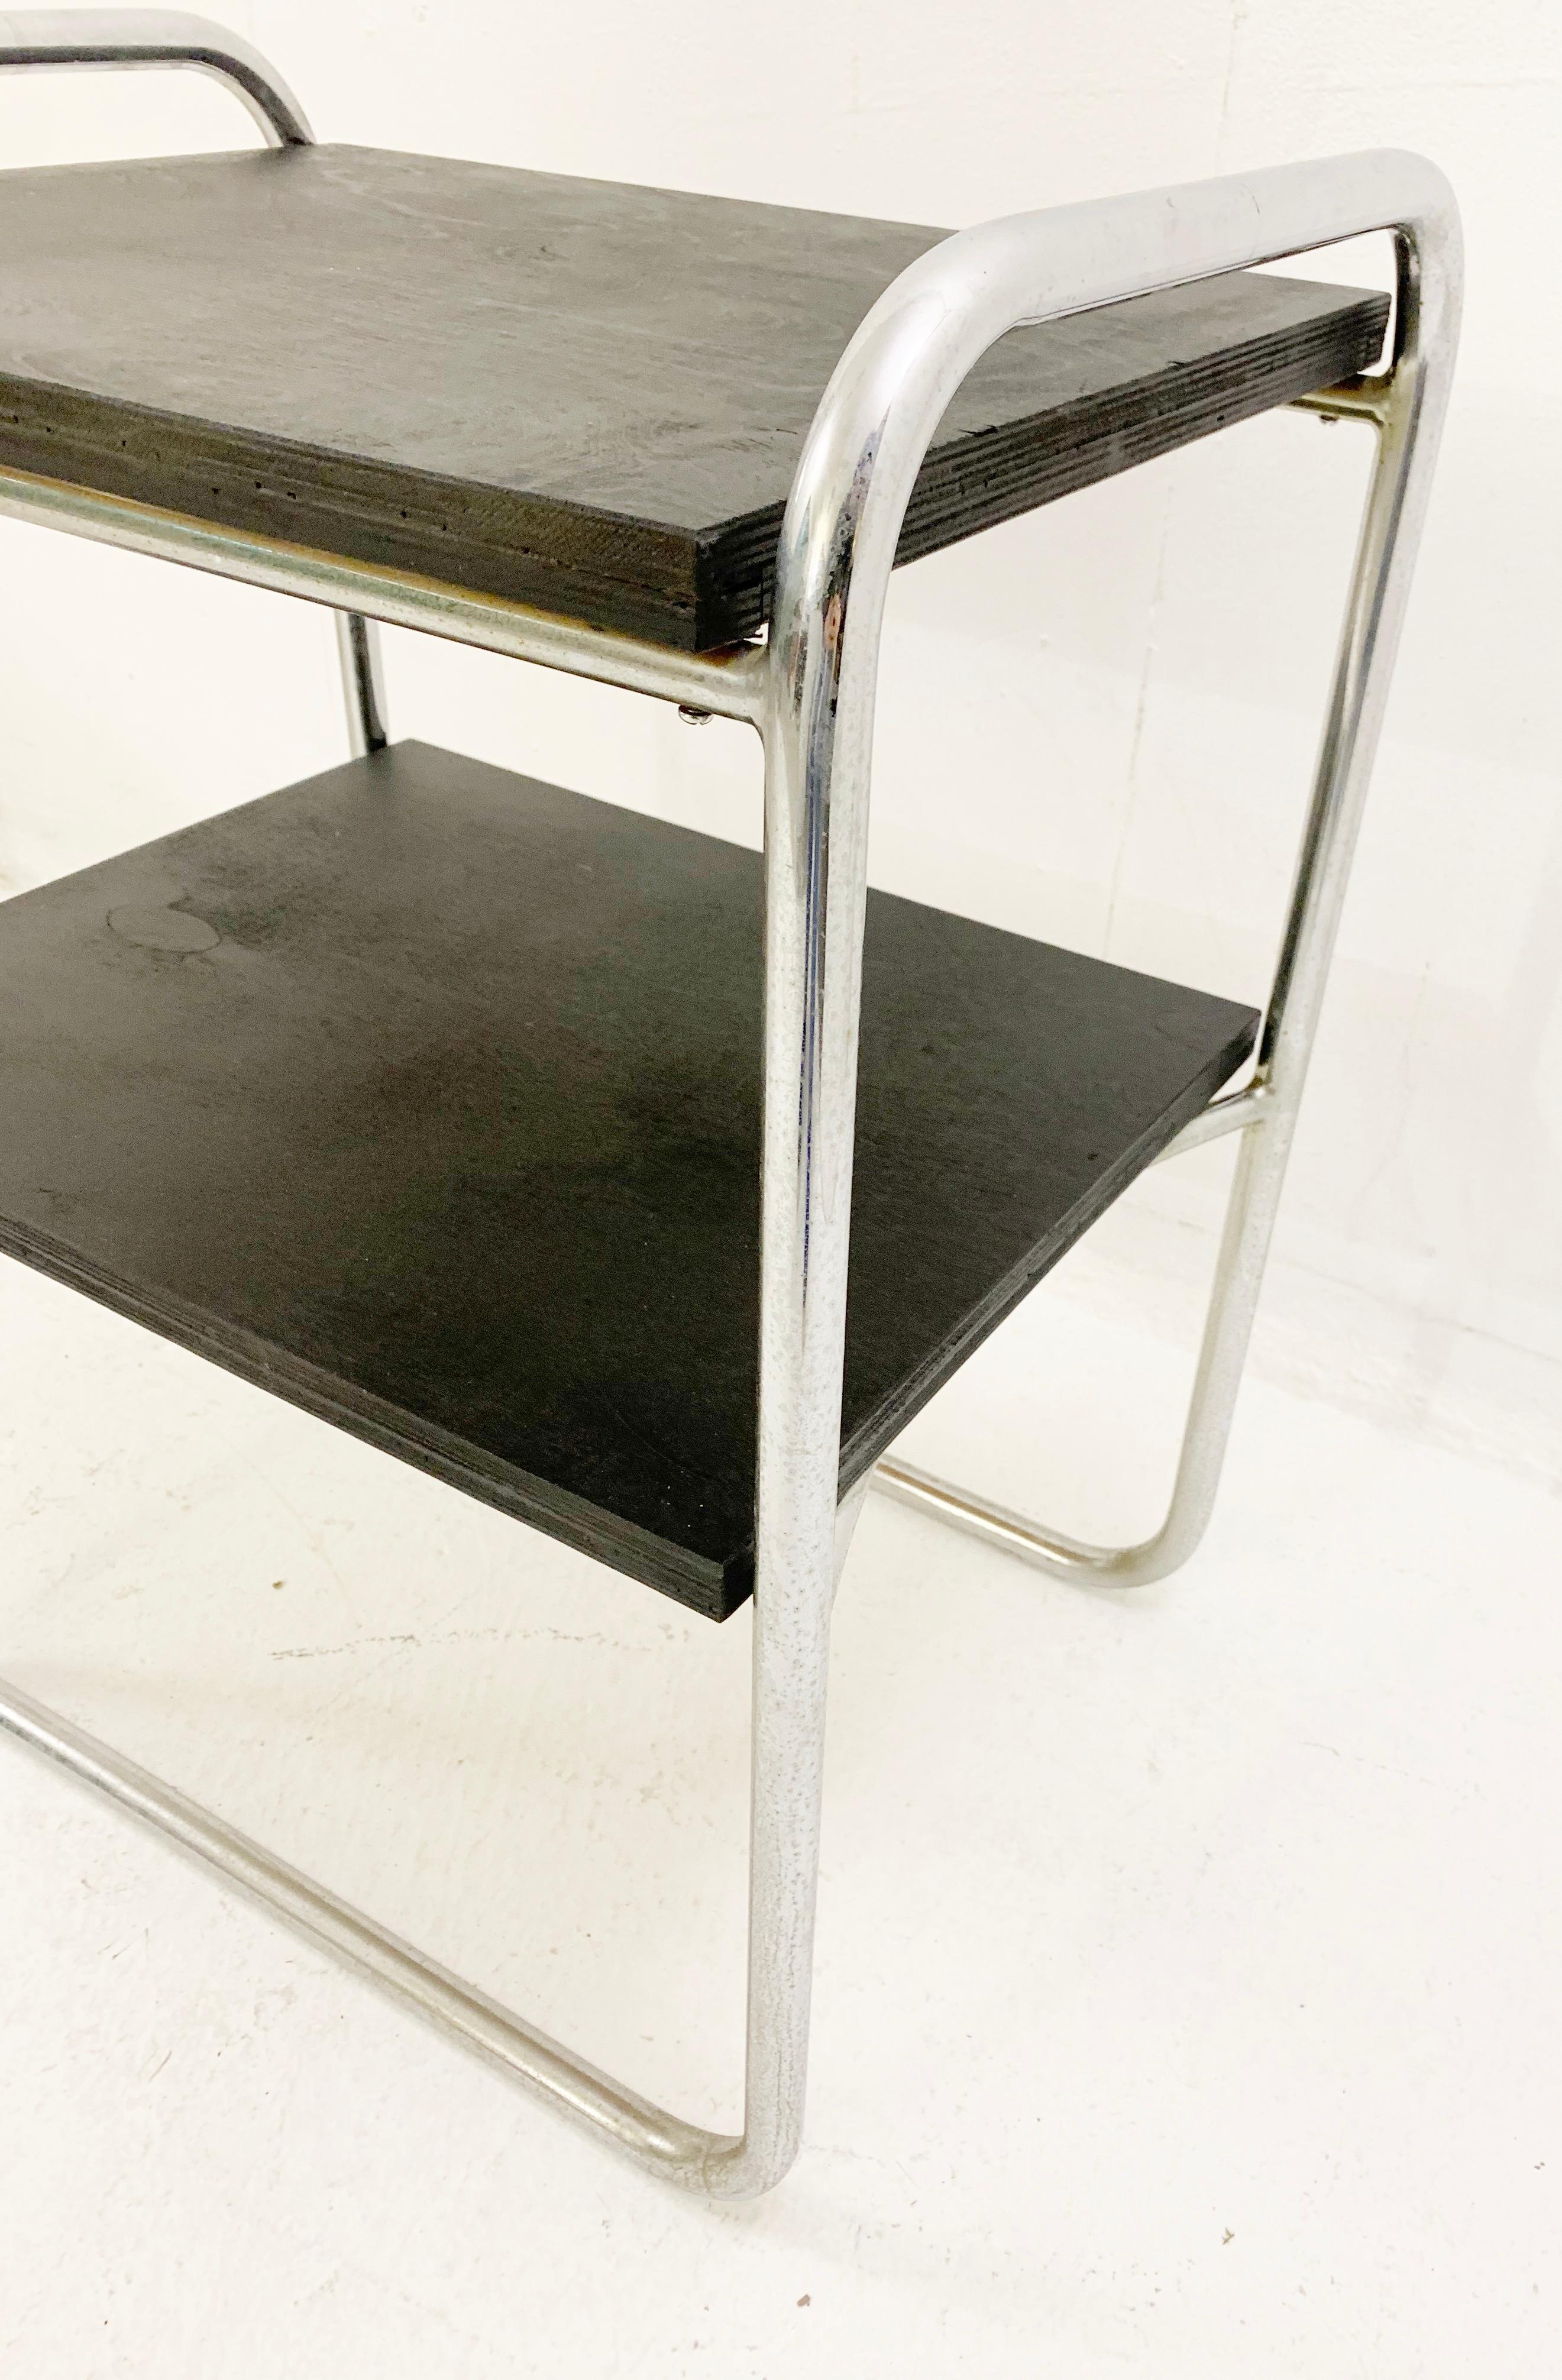 Modernist small wood and tubular steel side table - 1930s.